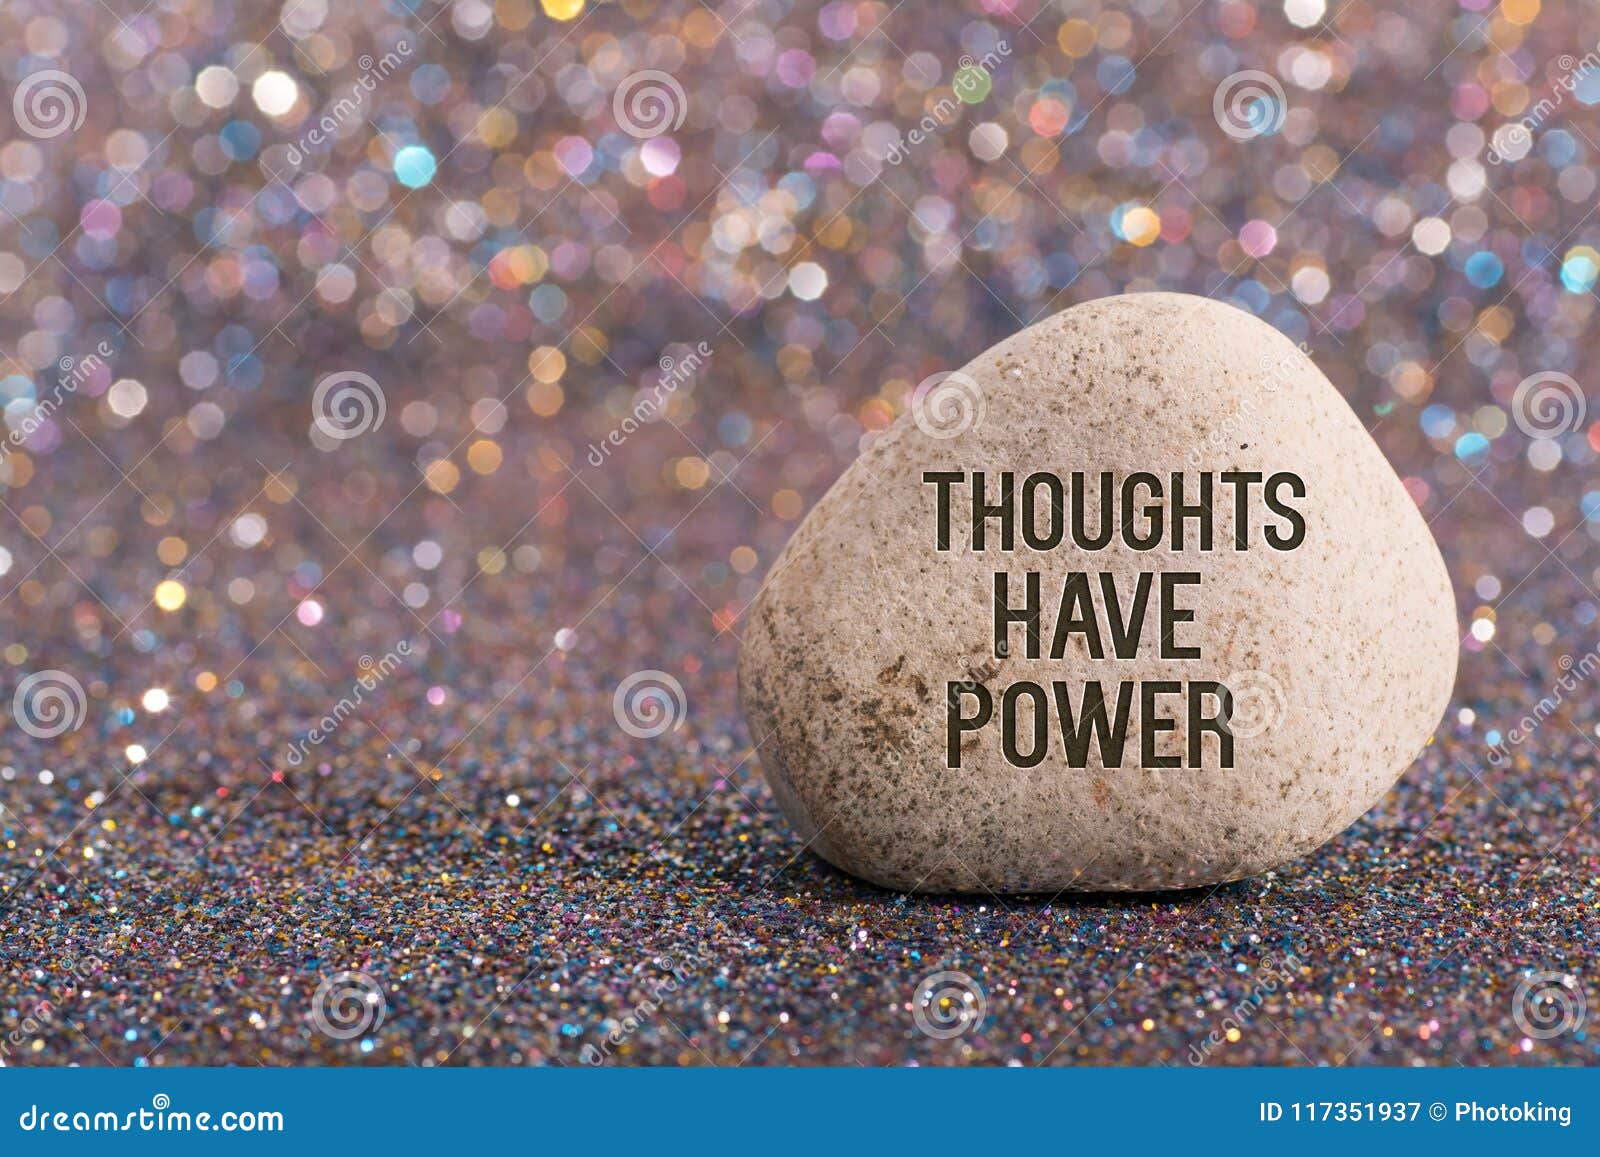 Thoughts Have Power On Stone Stock Image - Image of inspirational ...